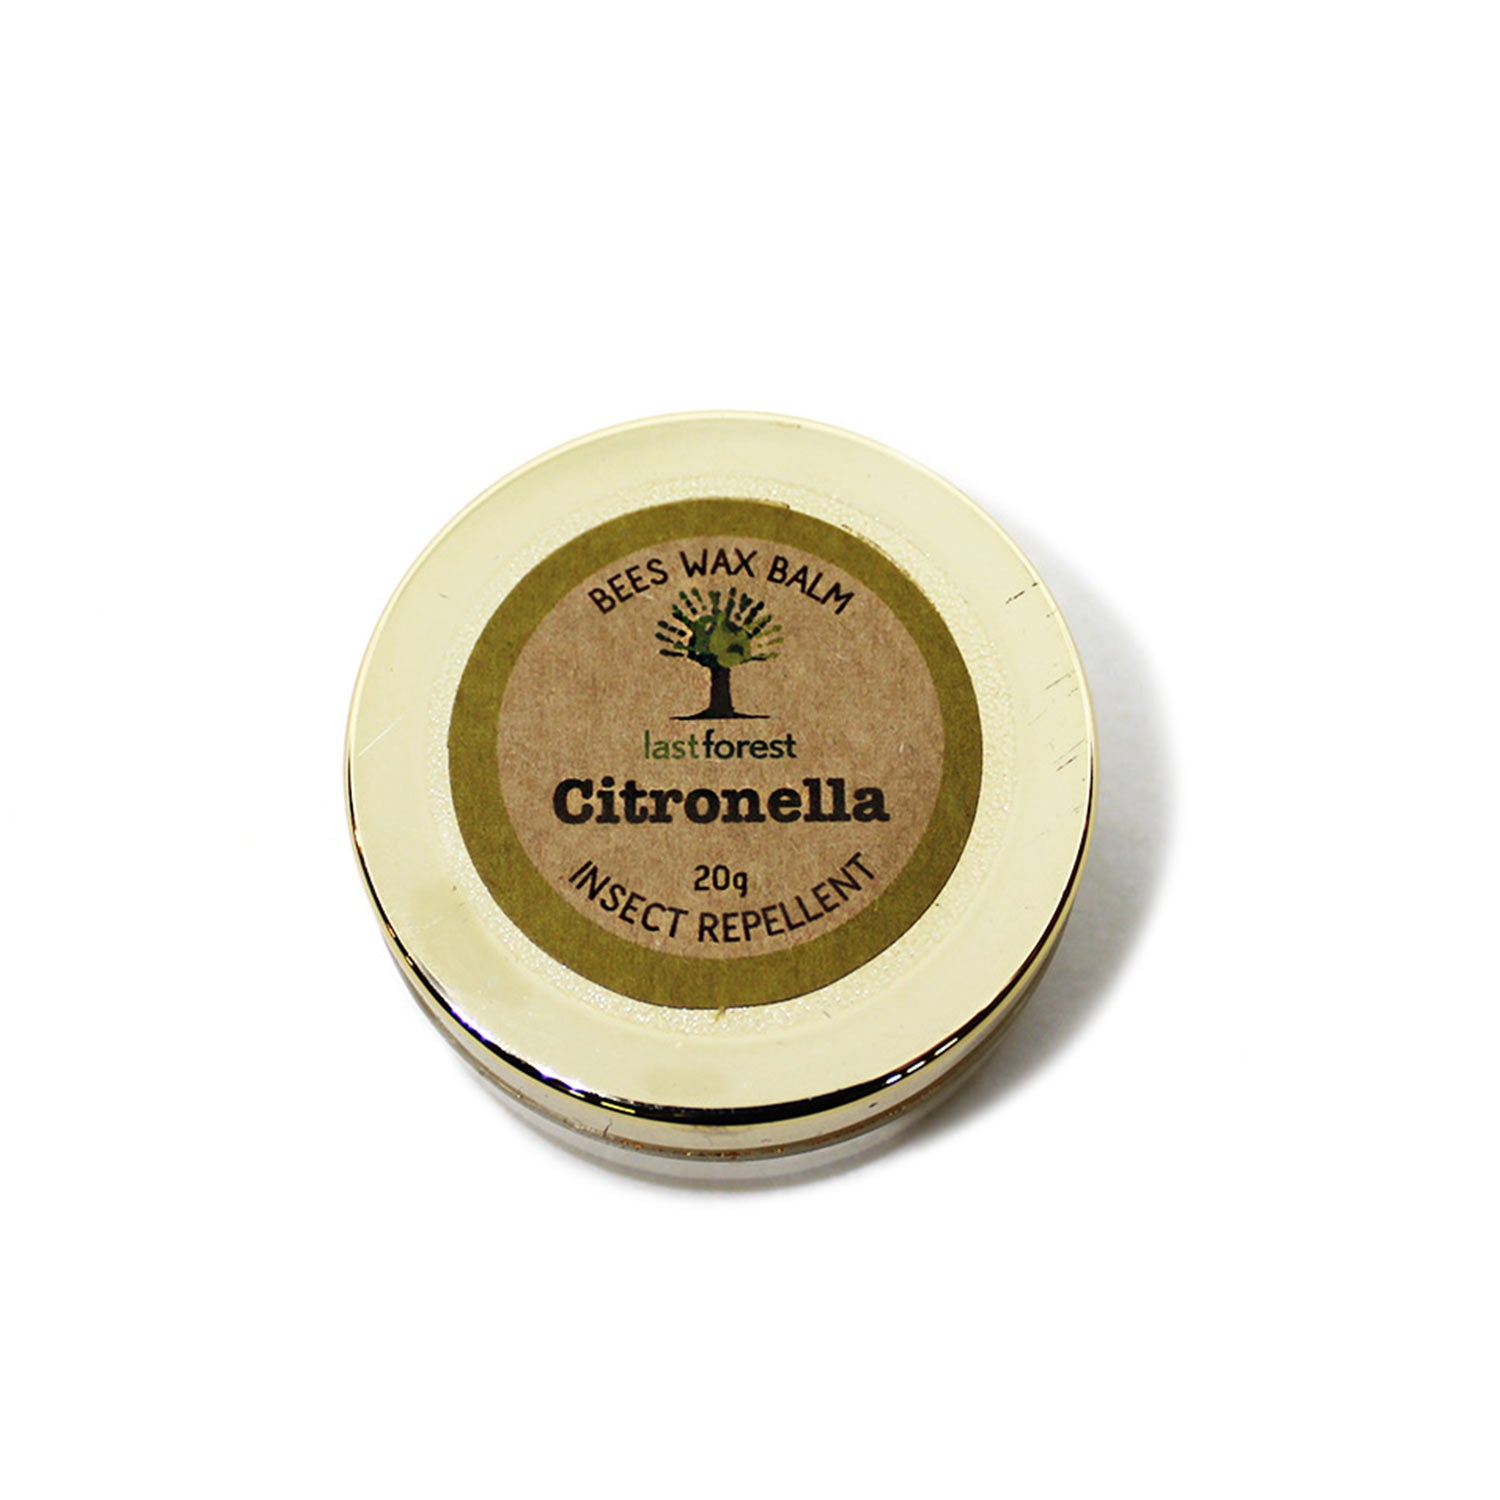 Last Forest Citronella Balm Insect and Mosquito Repellent, 20g